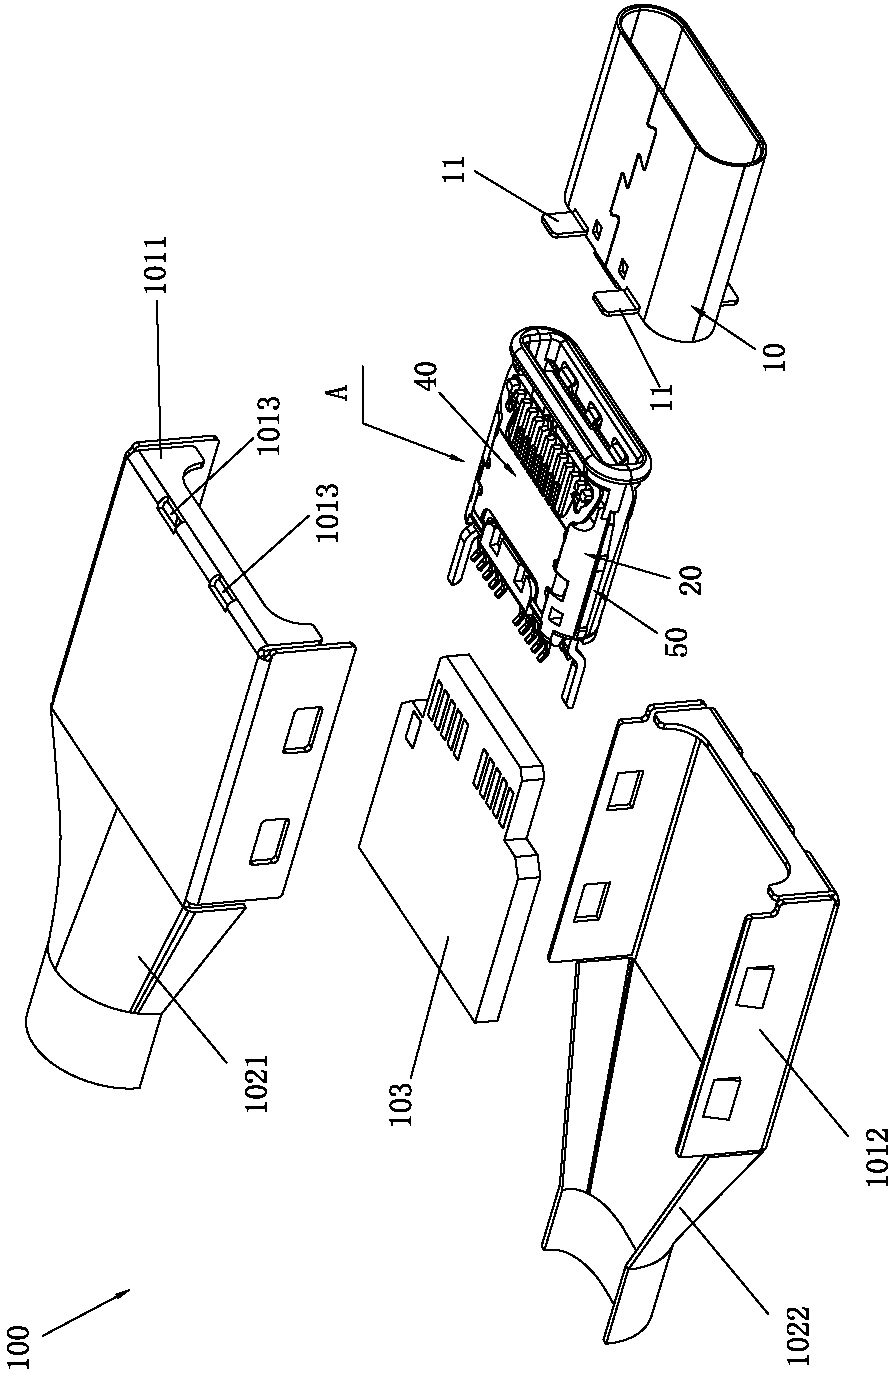 Connector plug, connector socket and connector combination of connector plug and connector socket